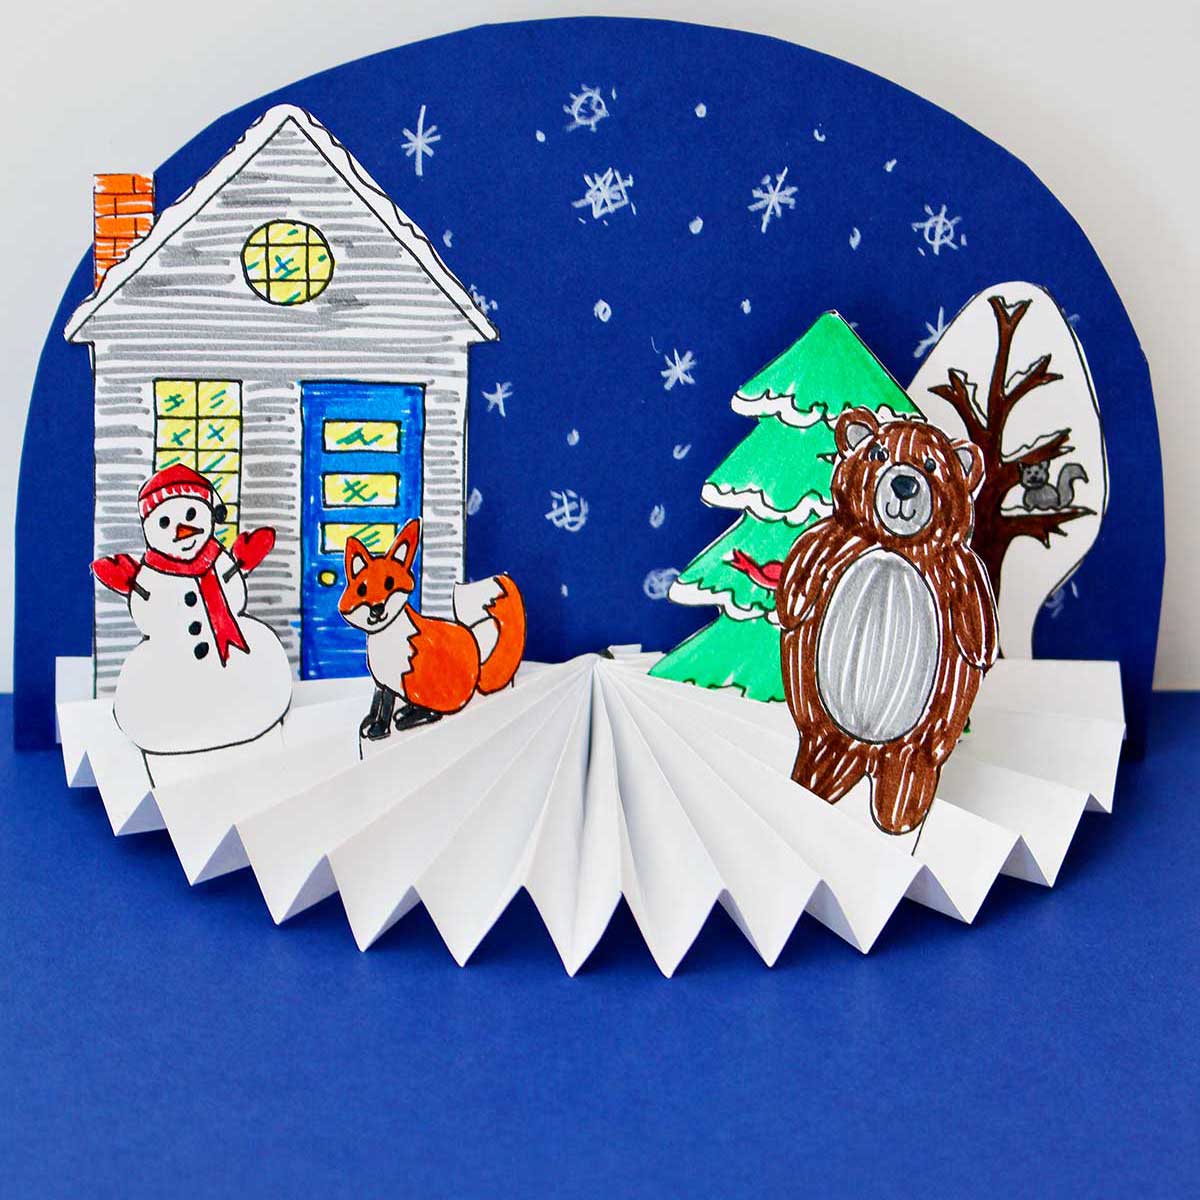 Completed Easy Paper Fan Craft in a winter theme with a snowman, fox, bear and snowy blue background. Square Image.